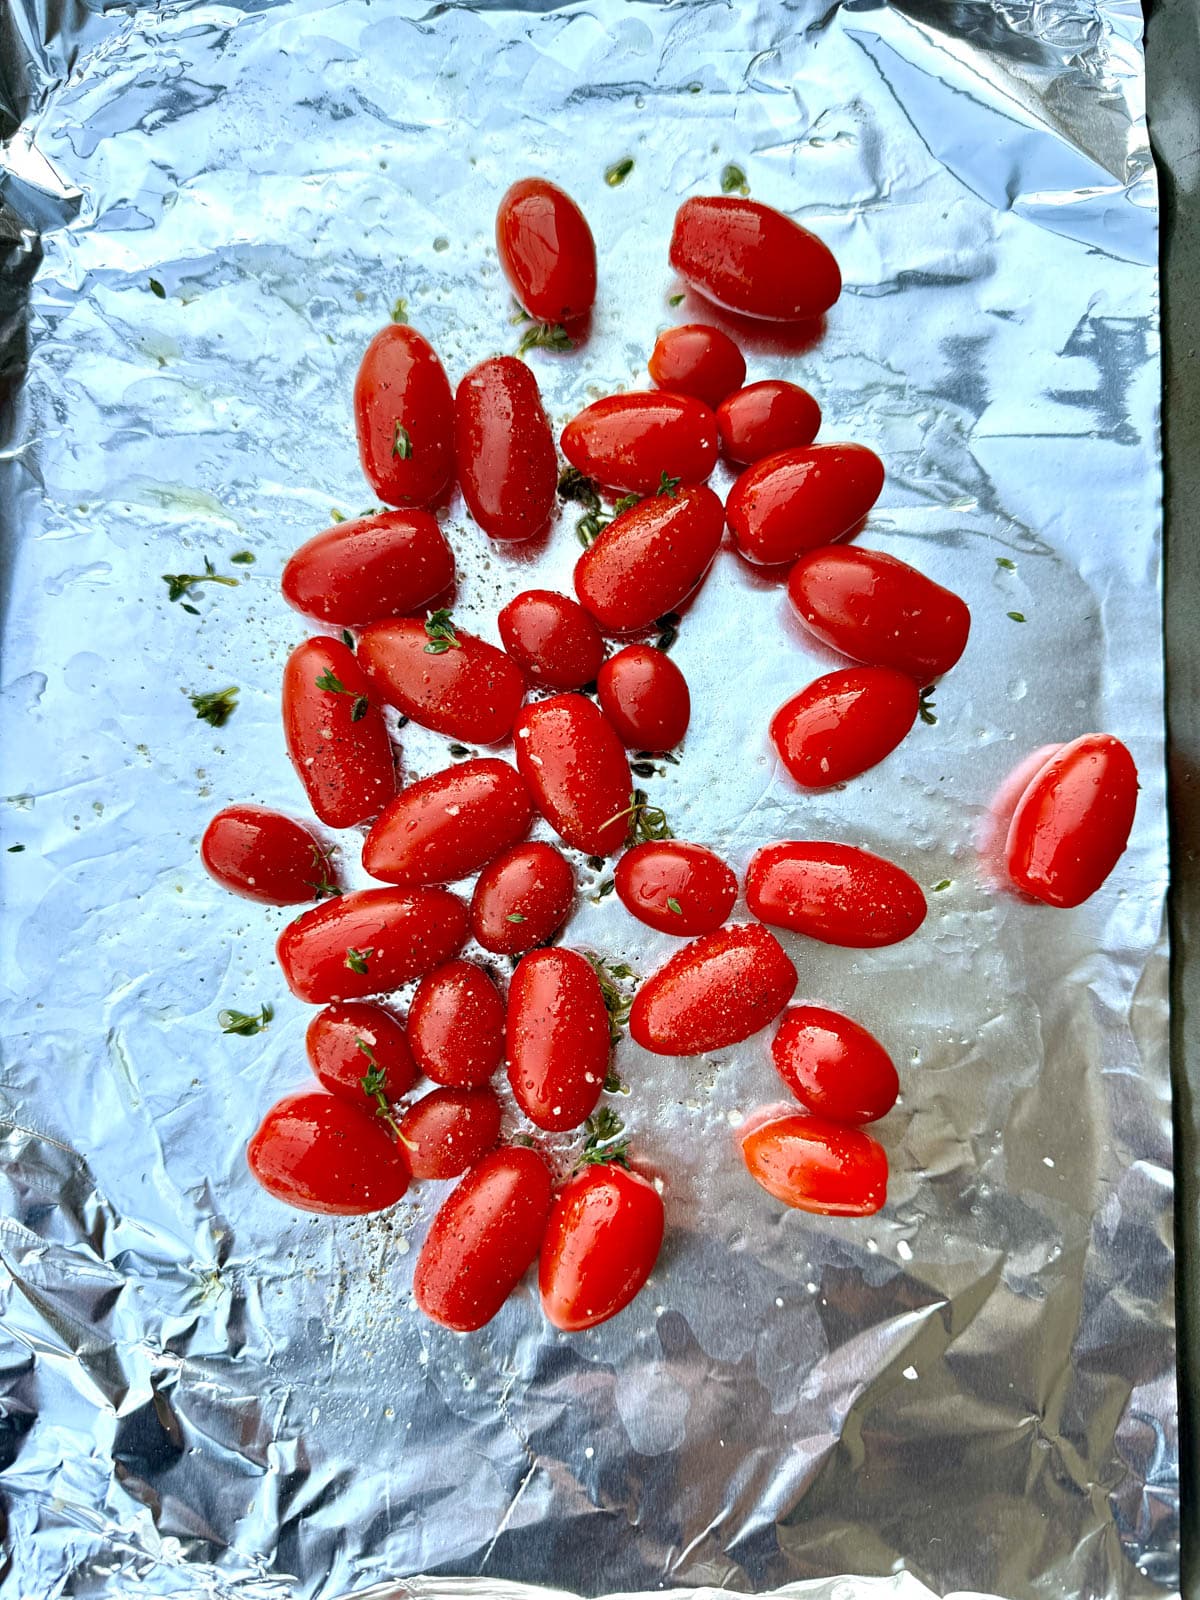 Line a baking sheet with foil and spread cherry tomatoes, thyme and oil.